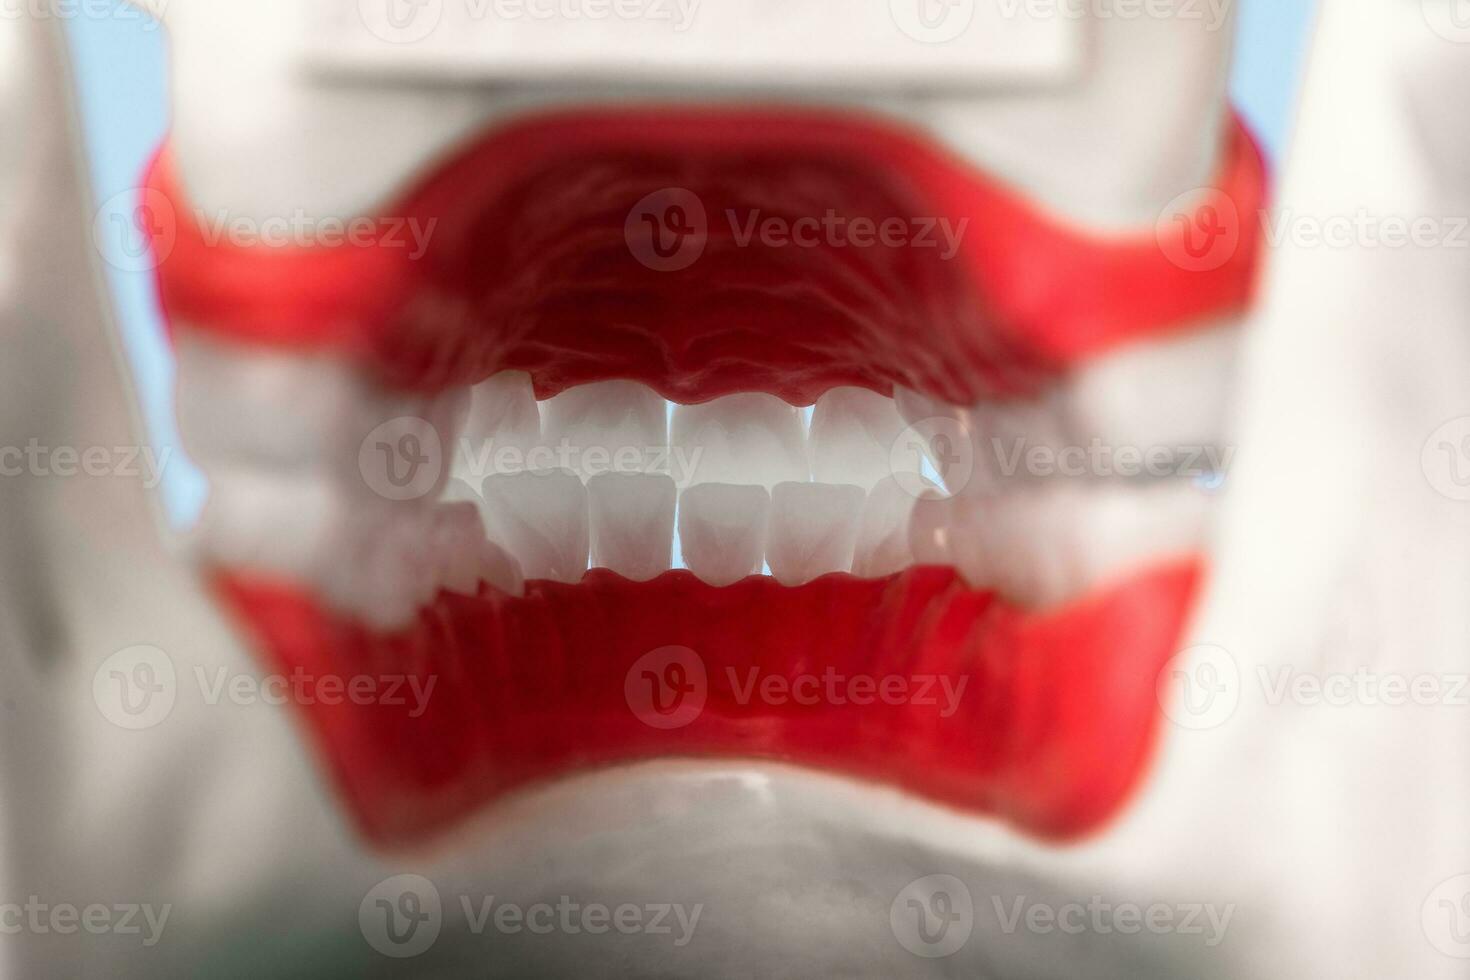 Human jaw with teeth and gums anatomy model isolated on blue background. View from inside. Healthy teeth, dental care and orthodontic medical healthcare concept. photo